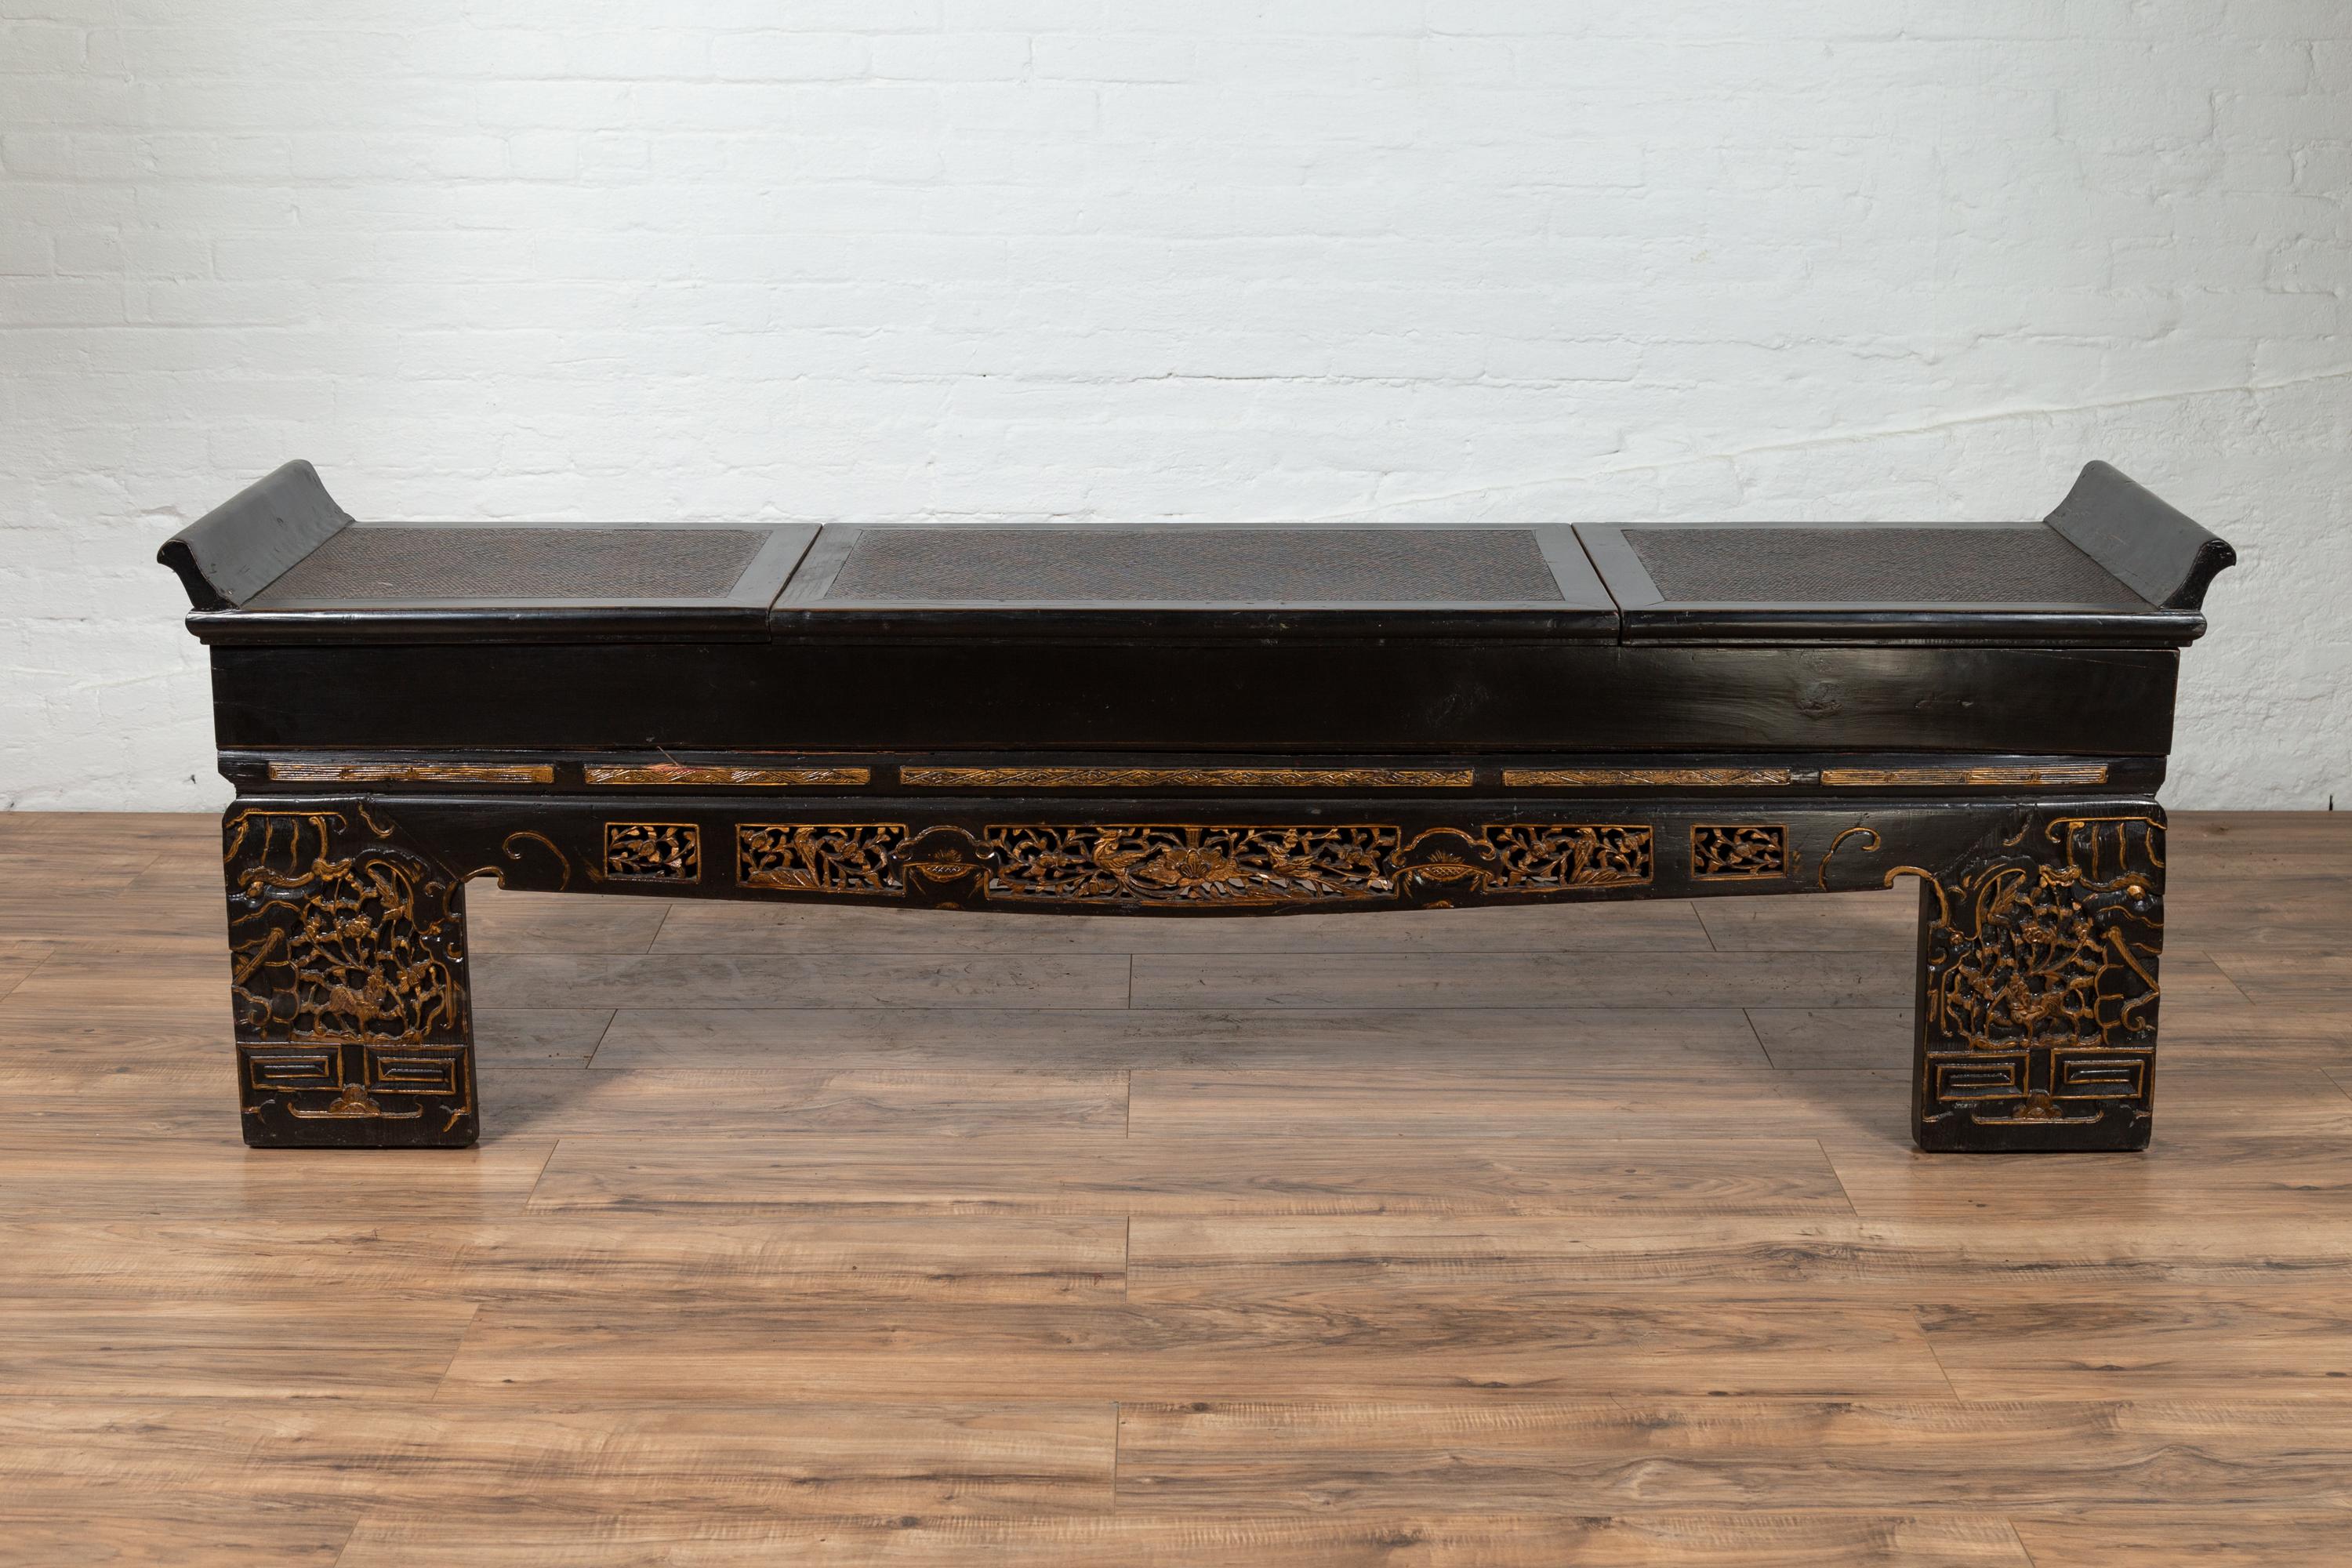 An antique Chinese Ming Dynasty style black lacquered low console table with hidden storage and rattan inset from the 20th century with everted flanges, perfect to be used as a bench. We currently have two pieces available, priced and sold